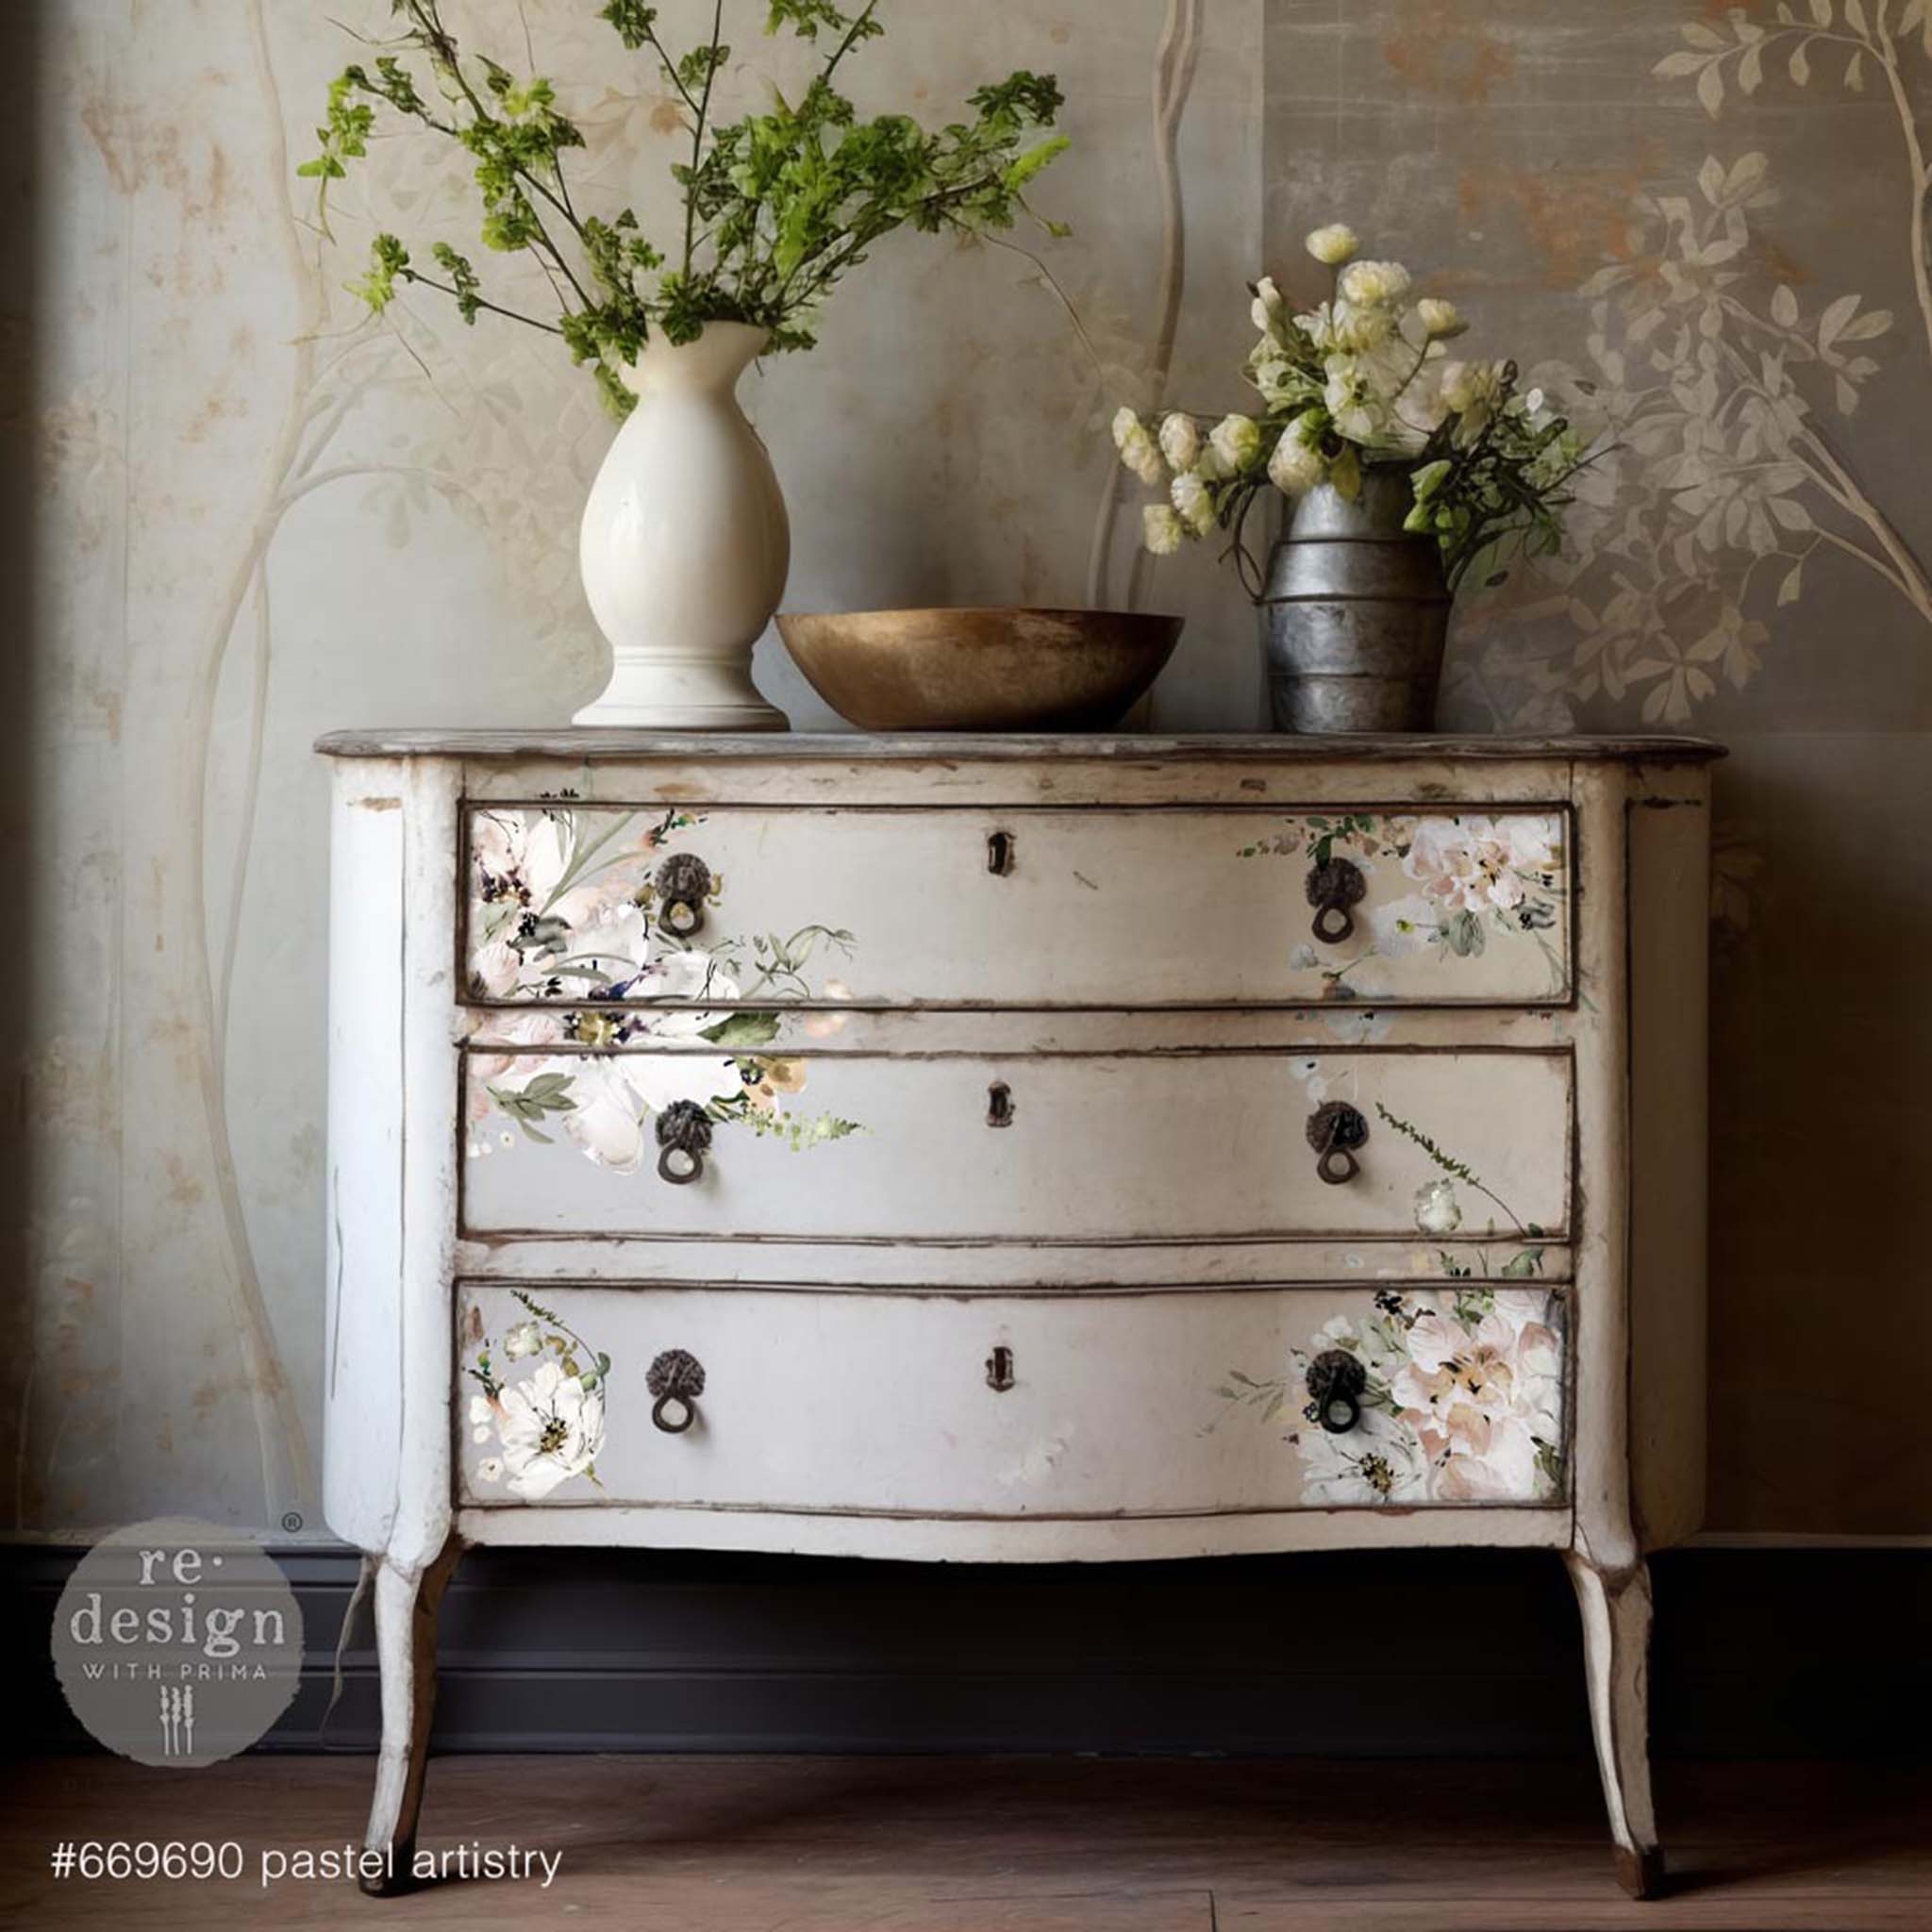 A vintage 3-drawer dresser is painted white and features ReDesign with Prima's Pastels Artistry transfer on its drawers.